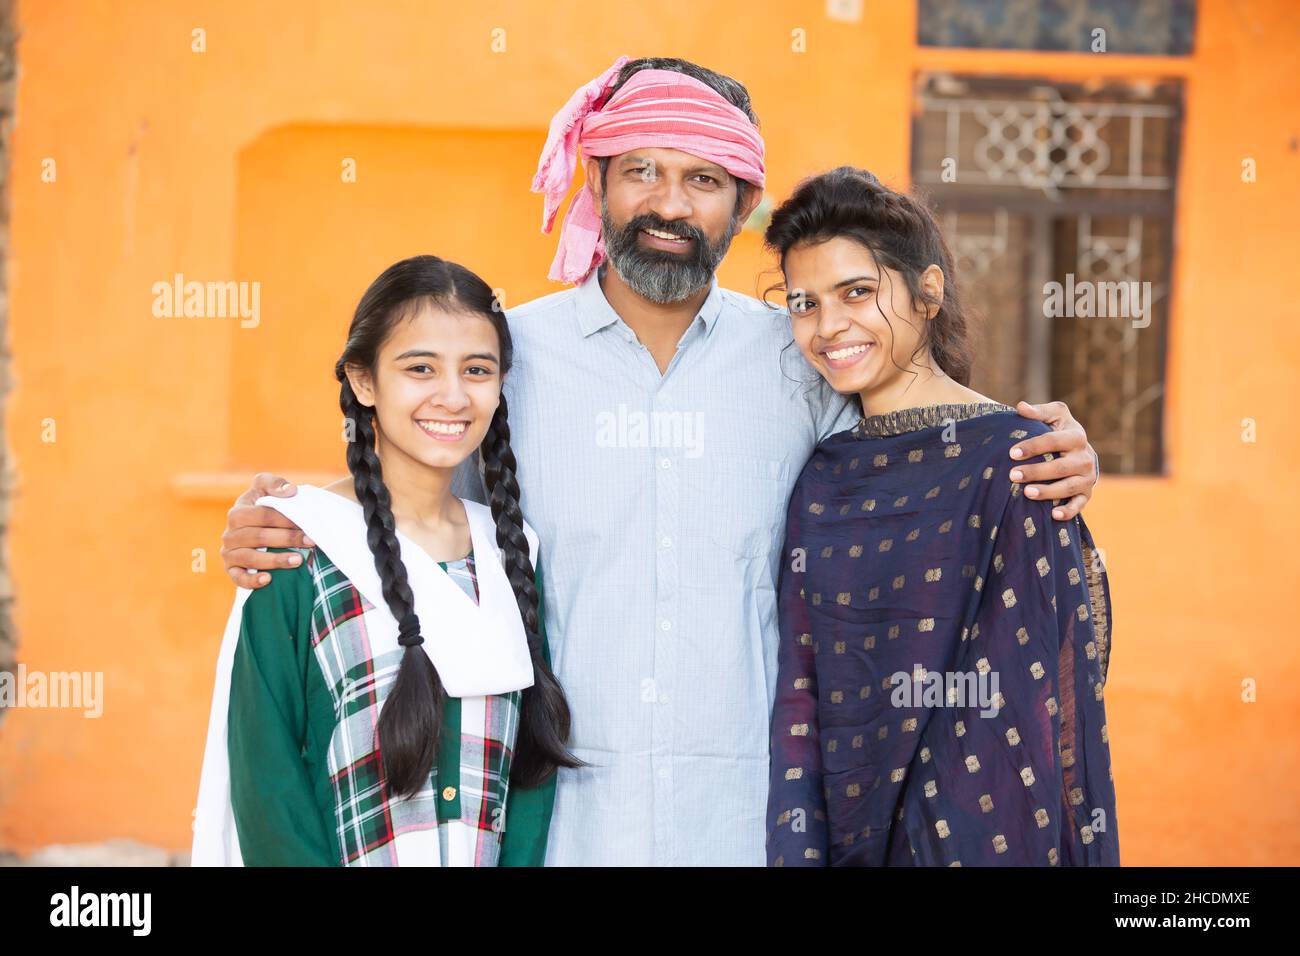 Portrait of happy traditional Indian father with his two young beautiful daughters showing his love and support, small family, rural india. beard Man Stock Photo